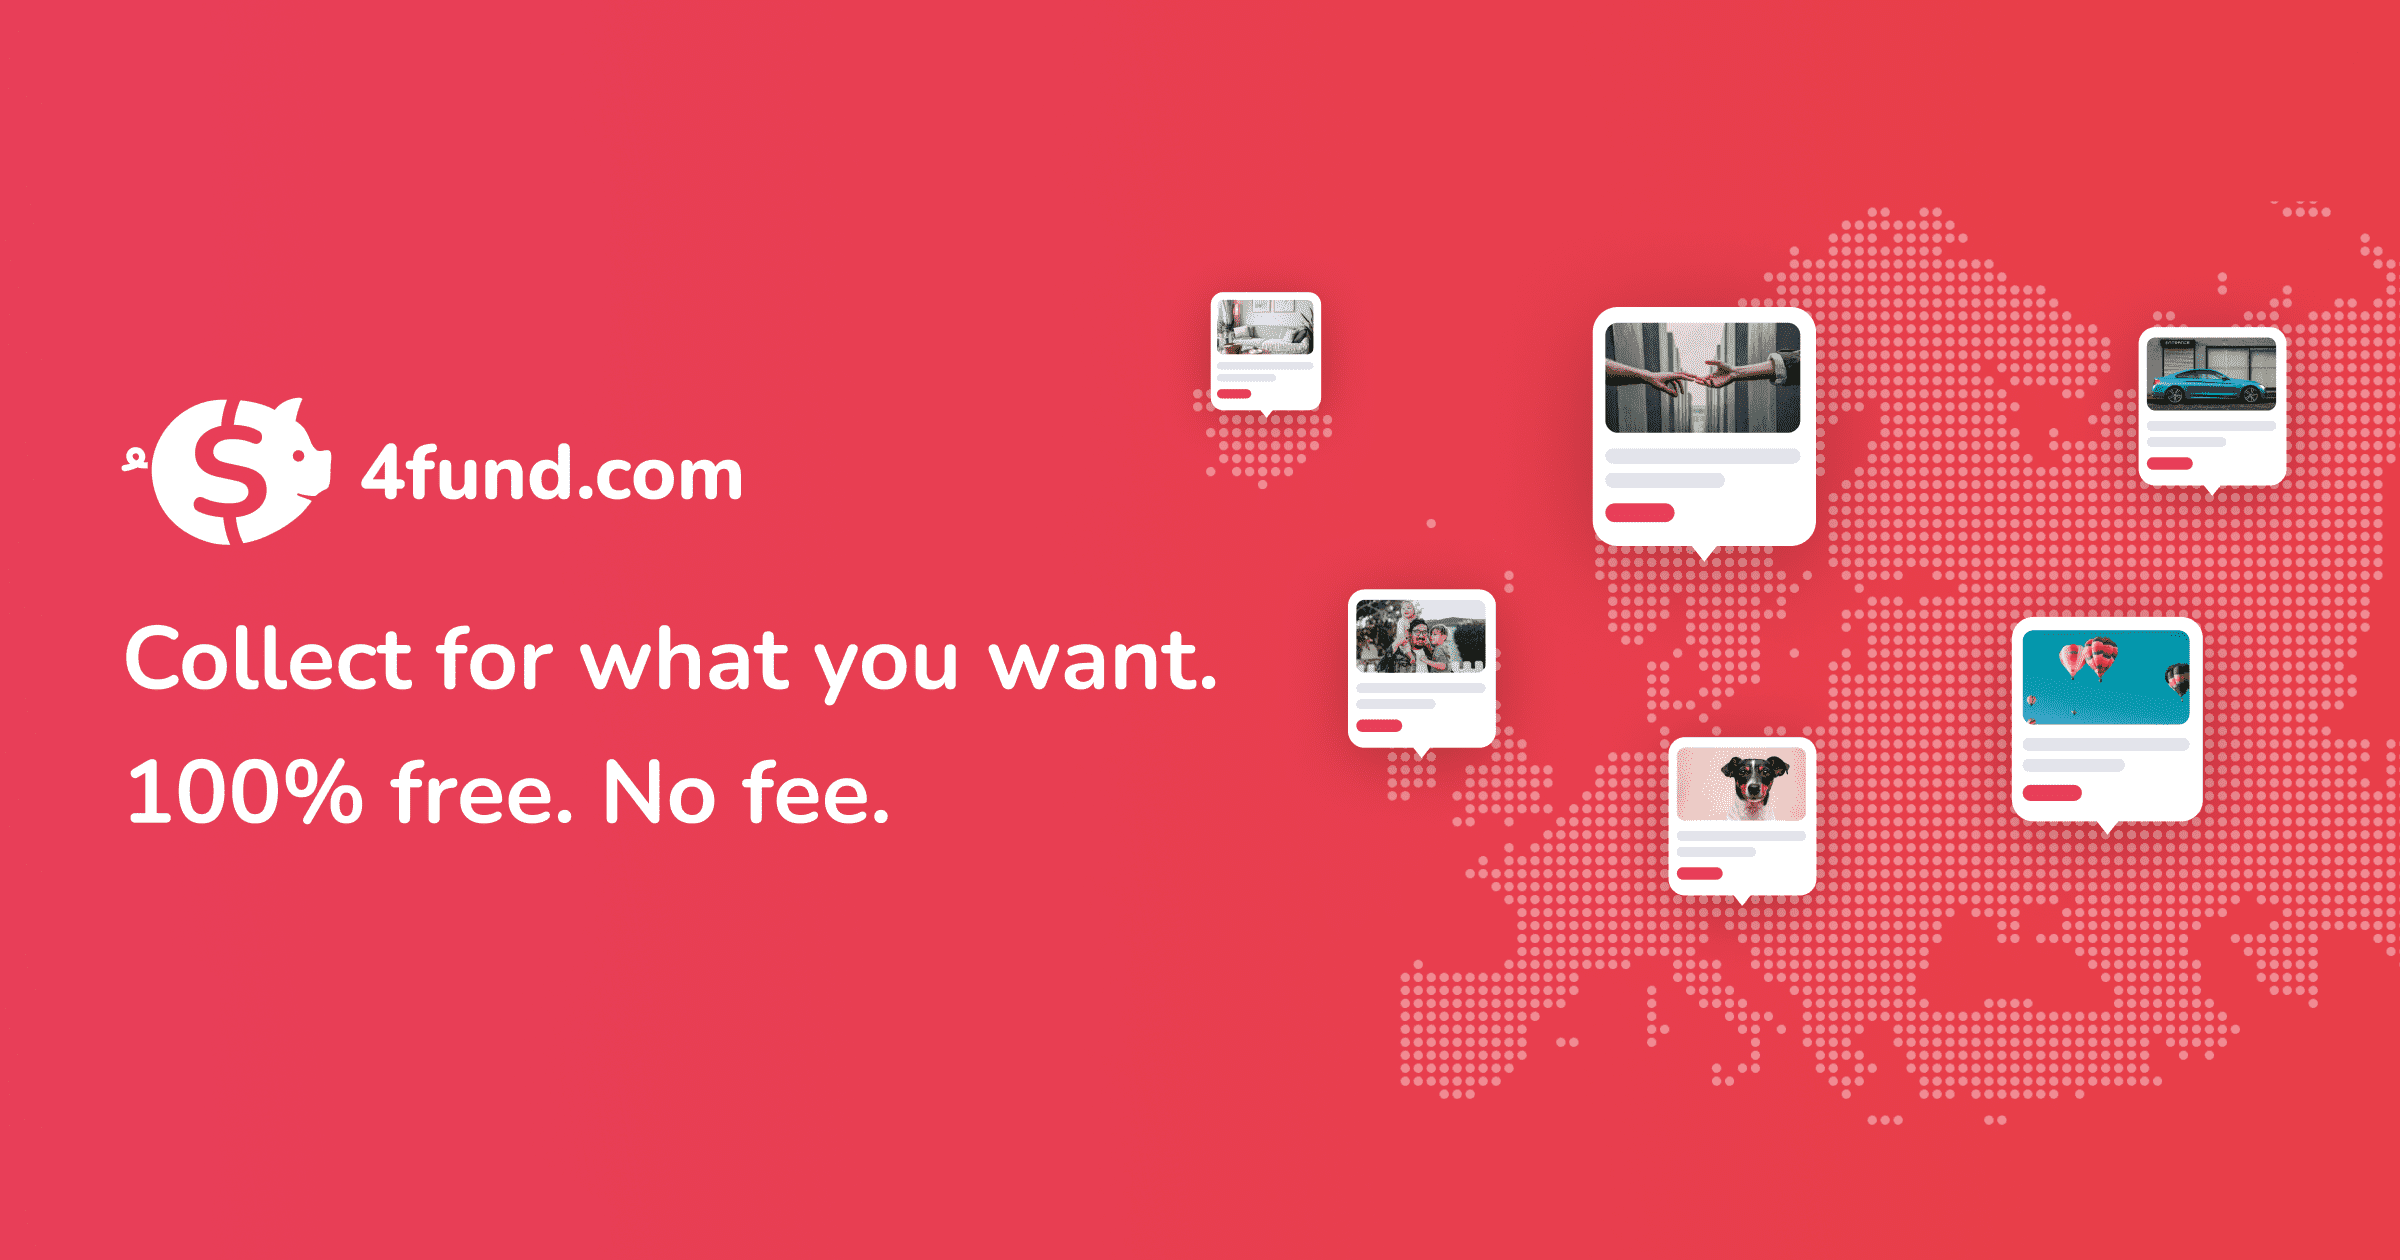 New fundraising platform in Europe. What is 4fund.com?